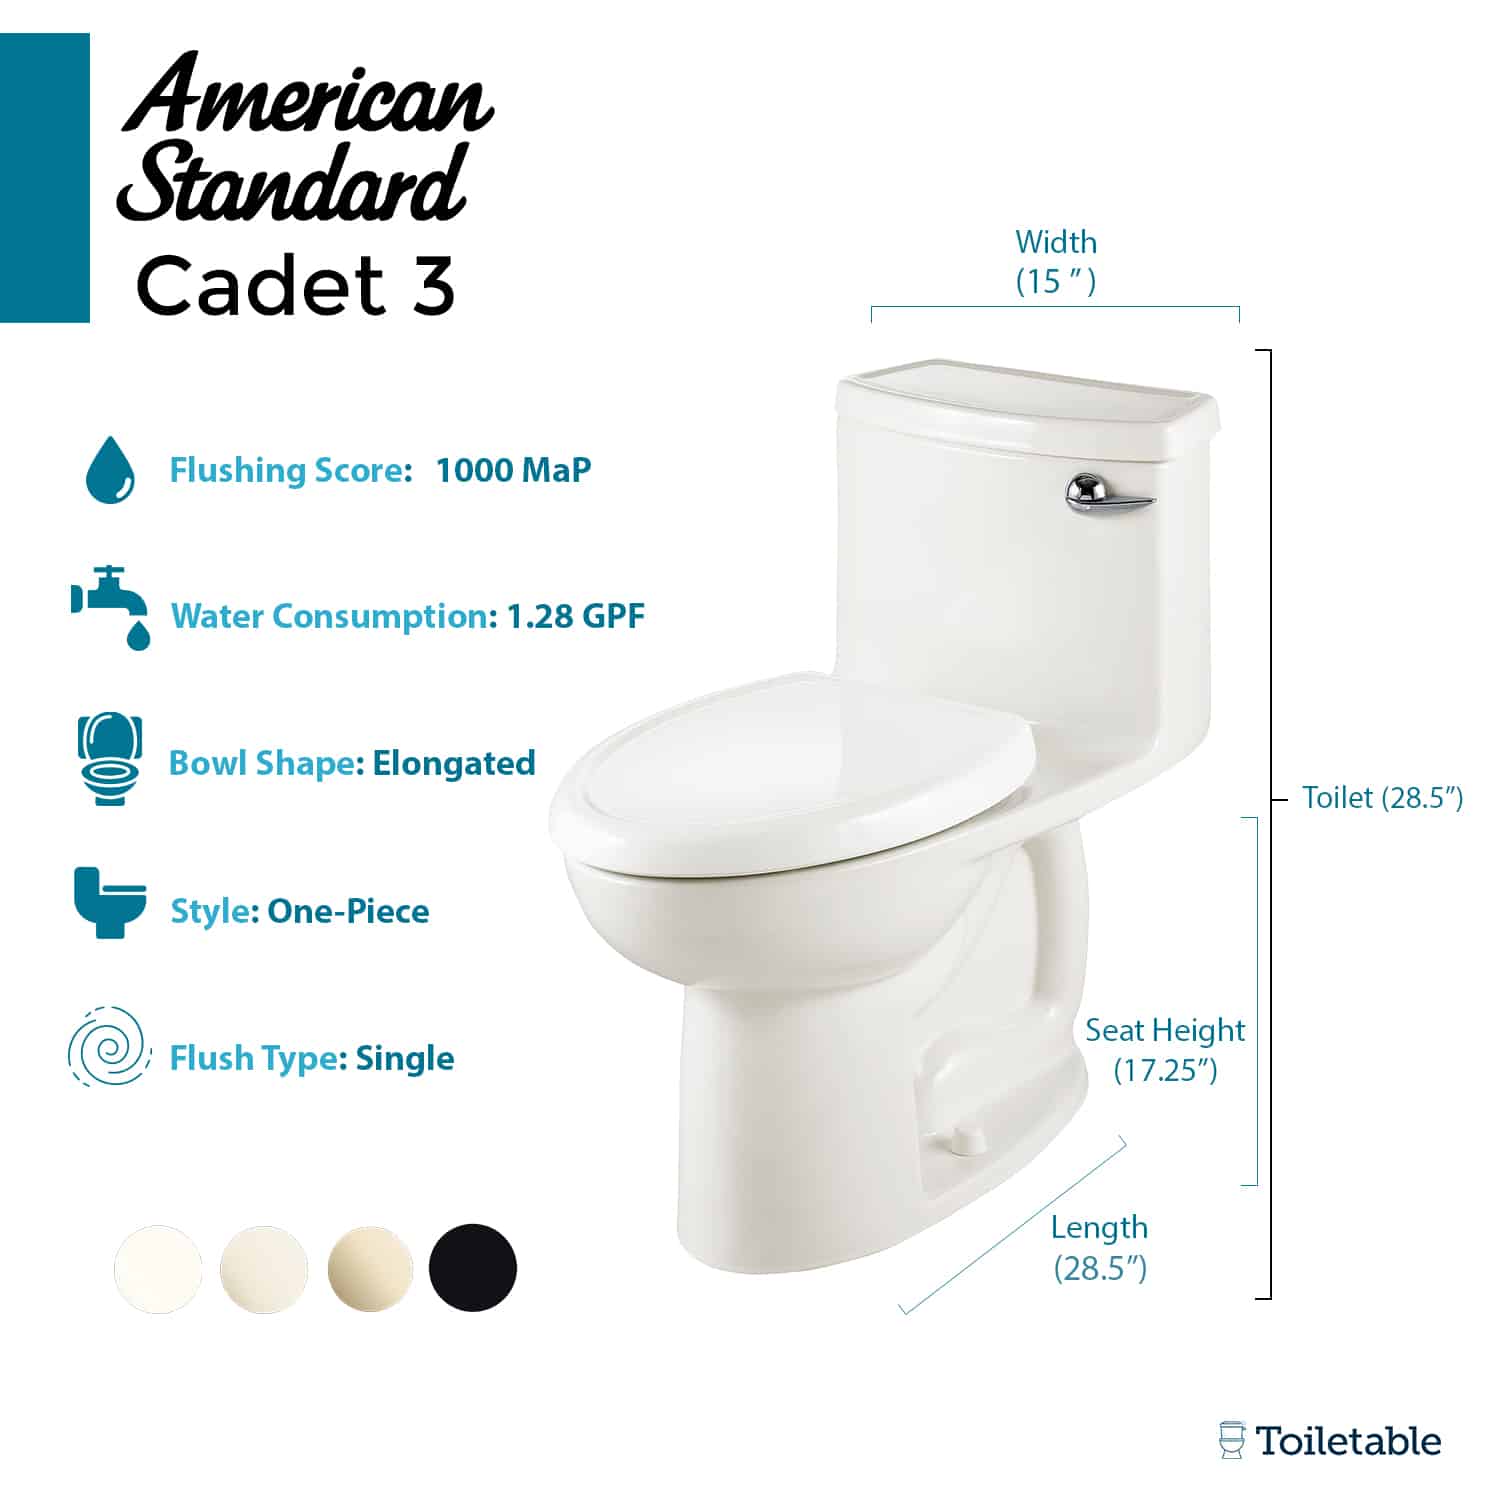 image with white cadet 3 toilet with measurements and features listed on left